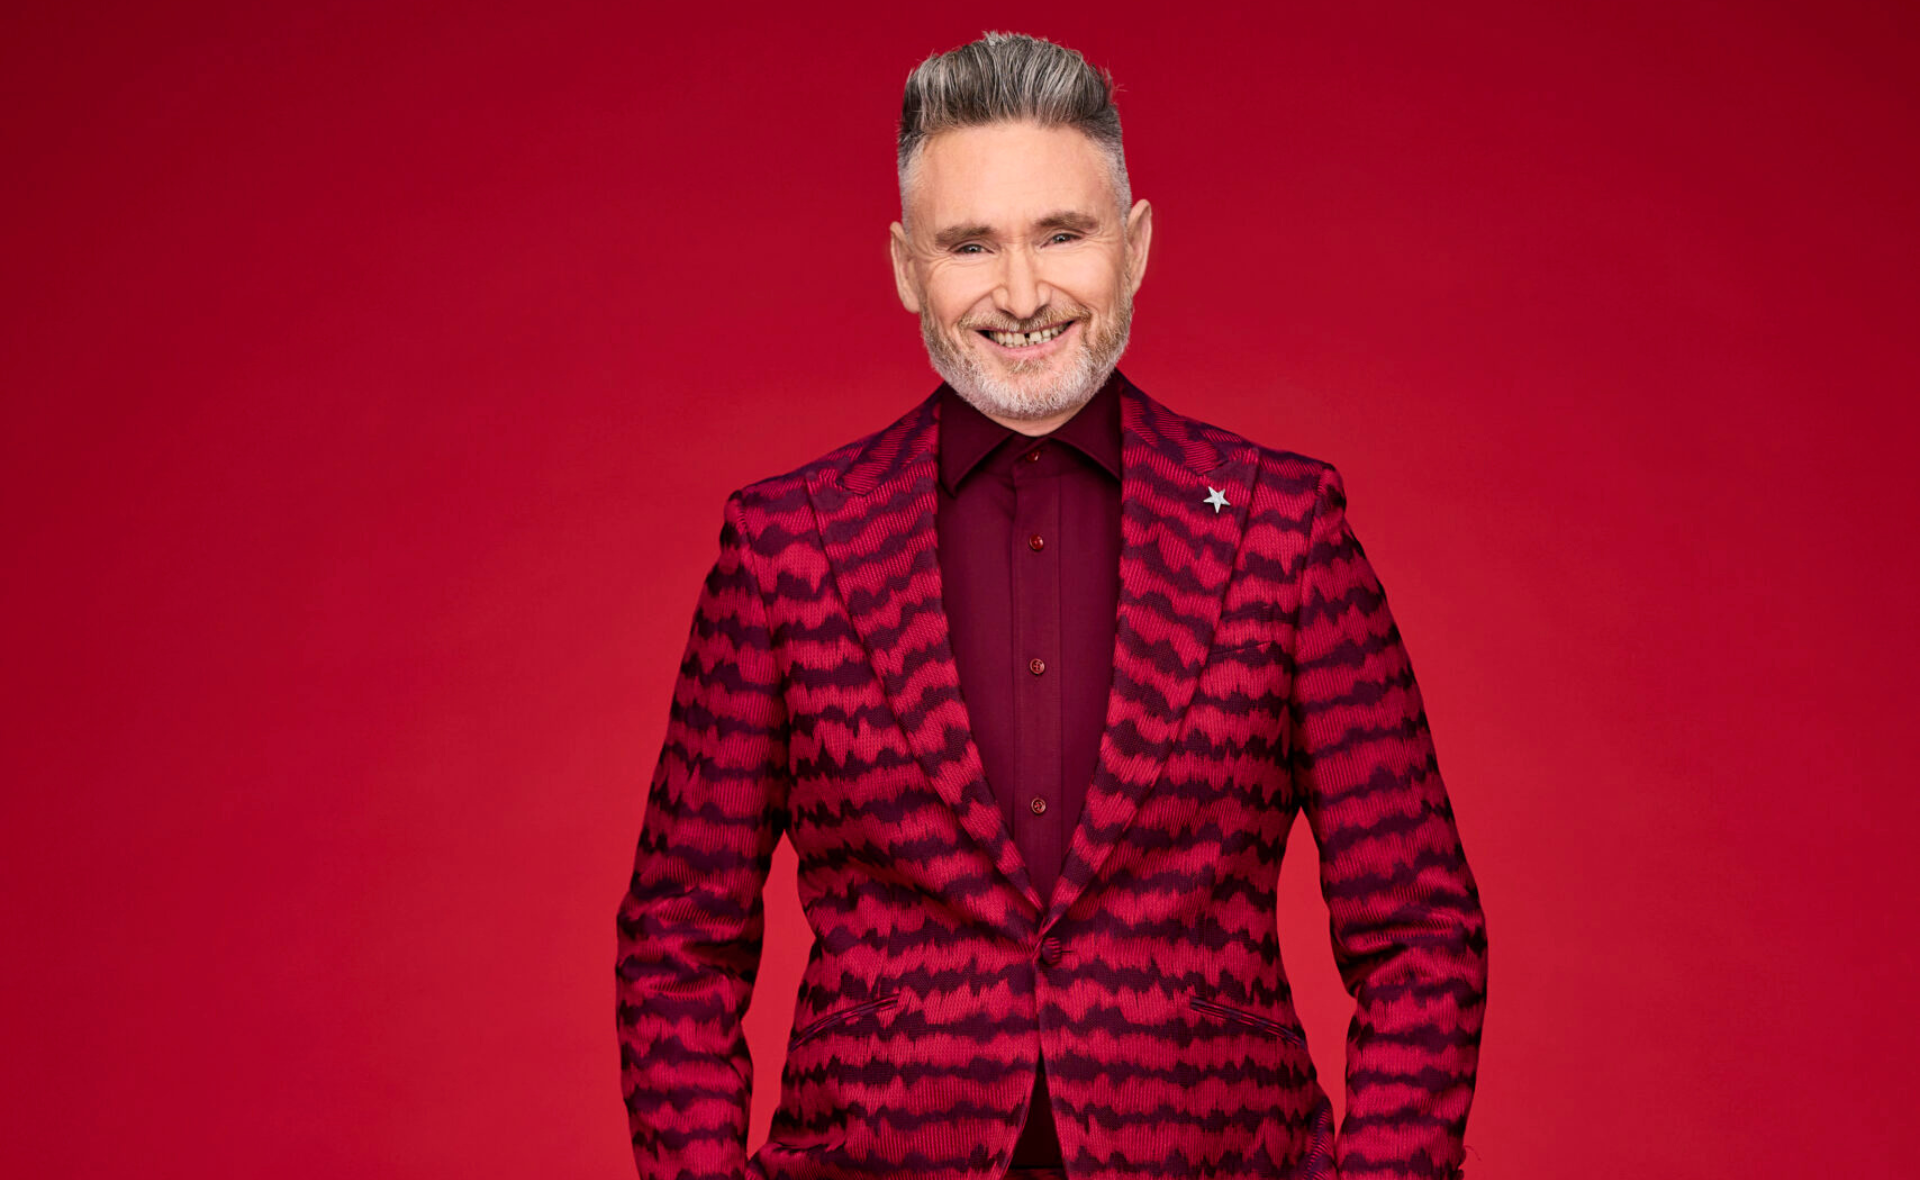 The Masked Singer’s Dave Hughes tells TV WEEK of the modern addiction he was determined to kick